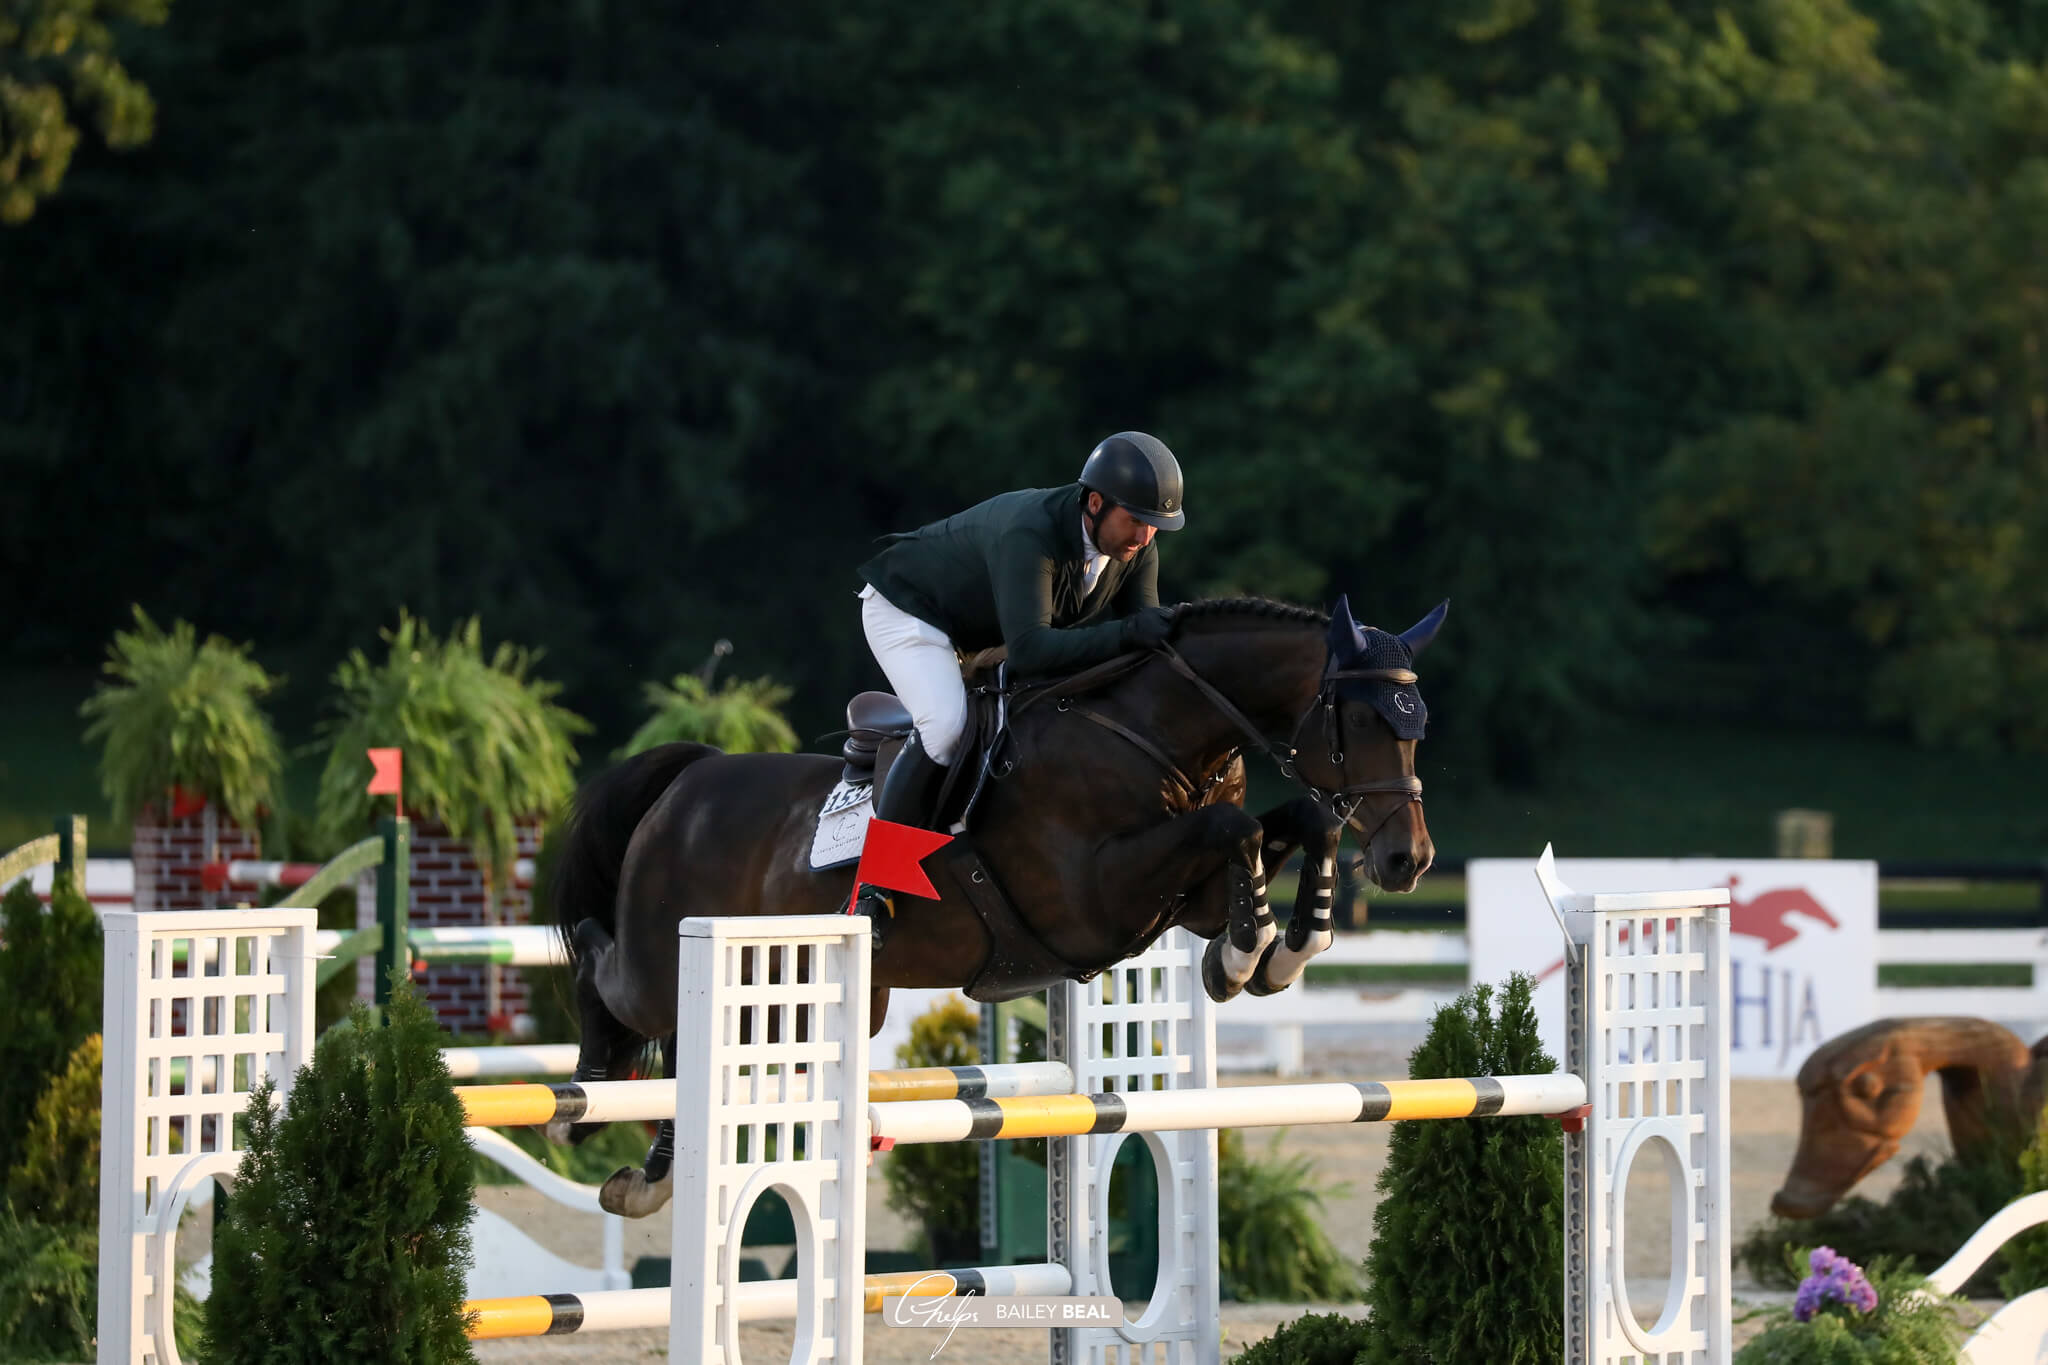 Lorcan Gallagher and Hunders Conlypso II impress in Lexington